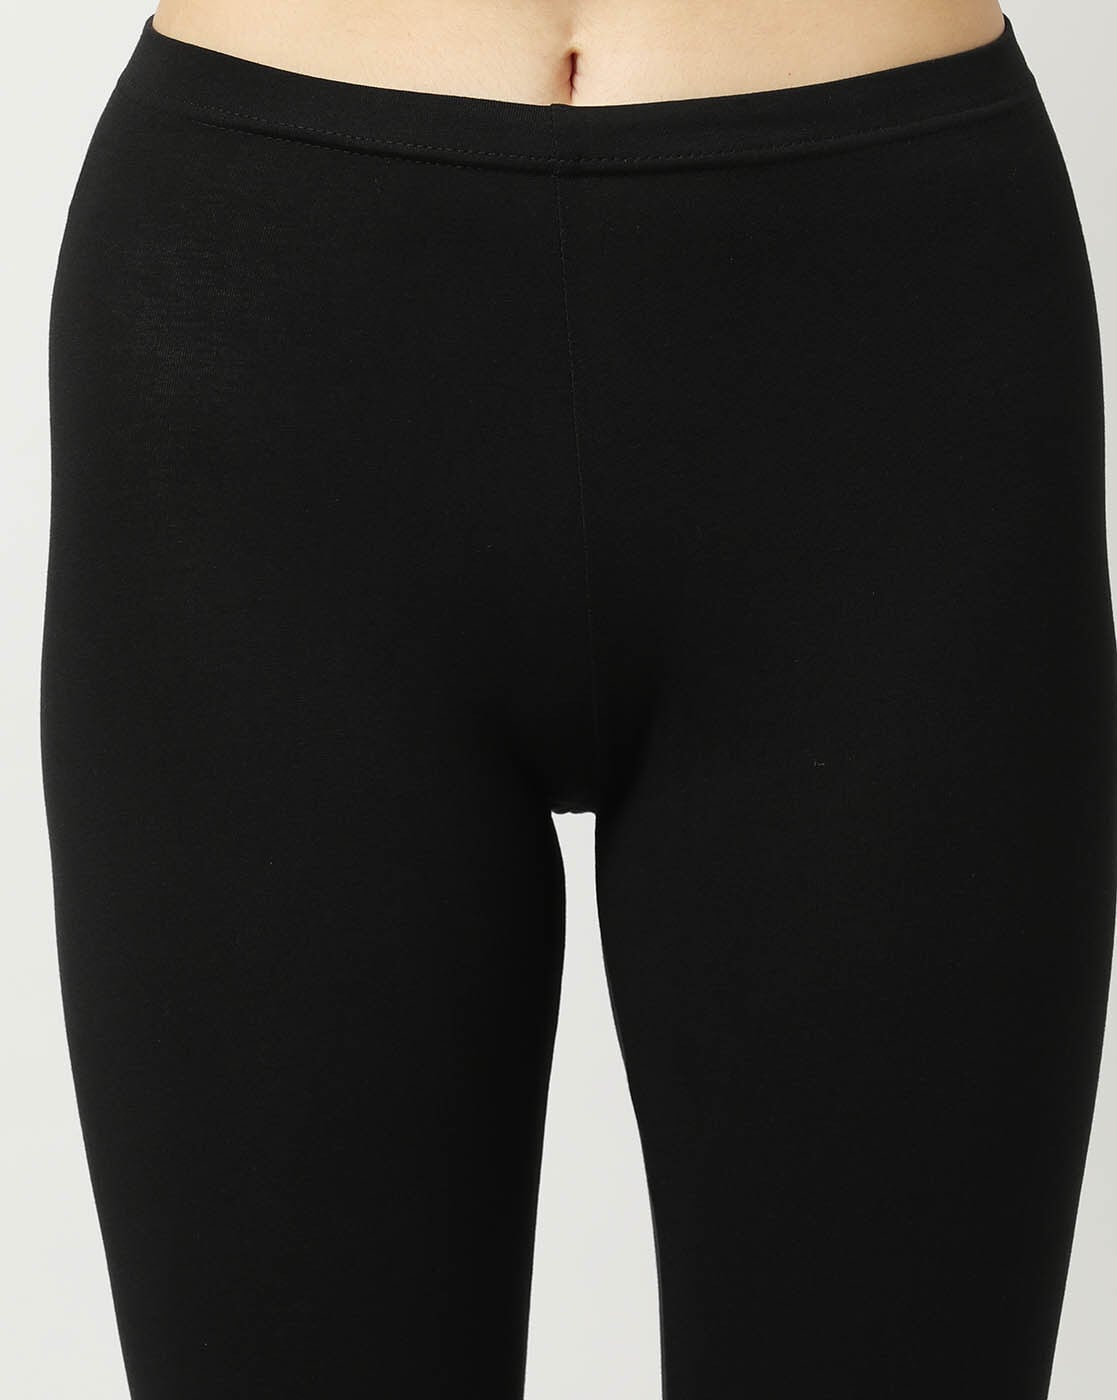 Active Wear | Avaasa Brand Ankle Length Large Size Combo Leggings | Freeup